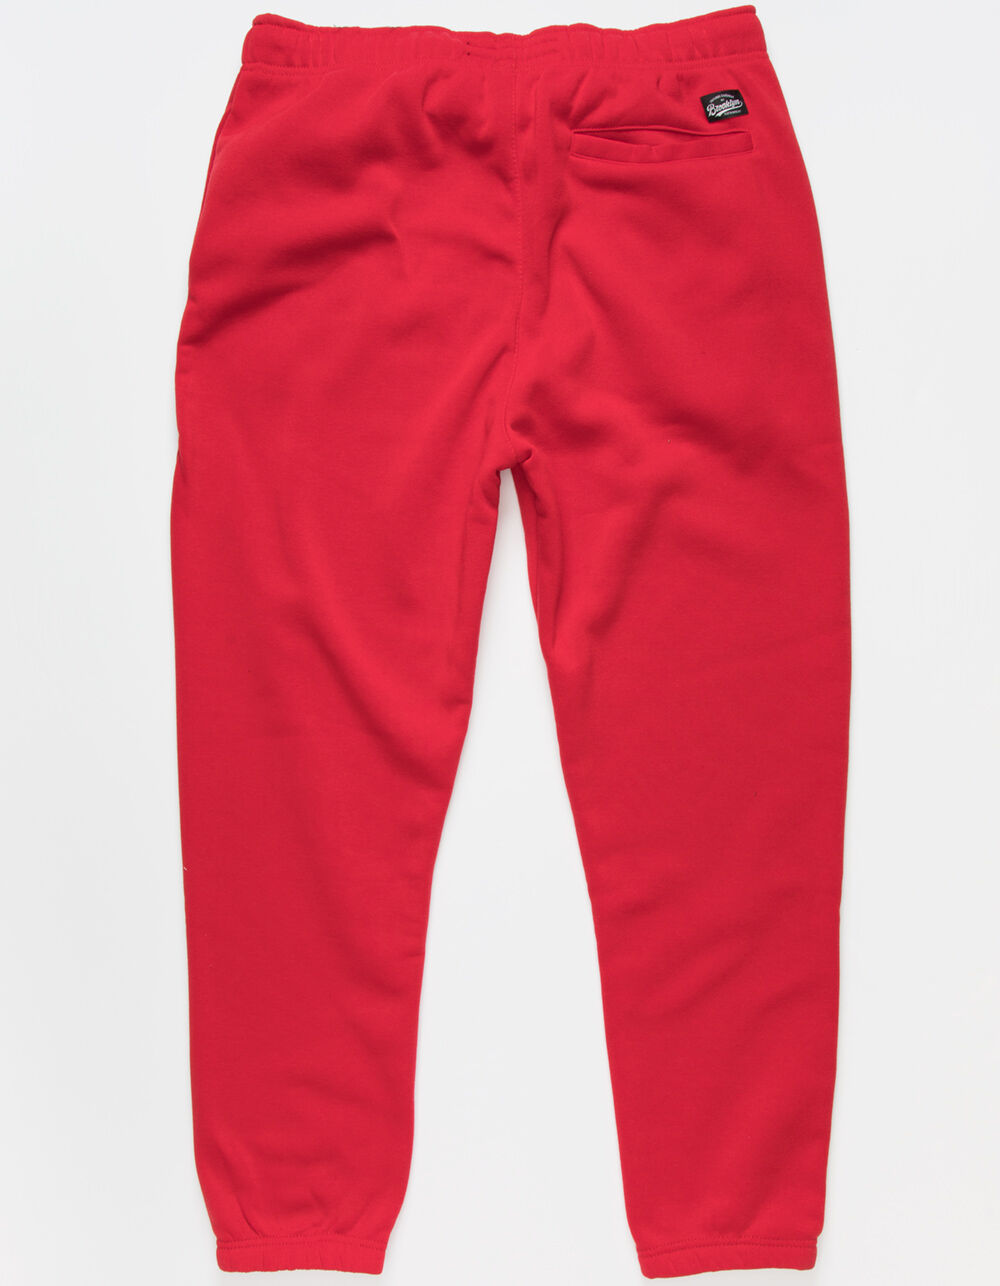 BROOKLYN CLOTH Core Mens Red Sweatpants - RED | Tillys